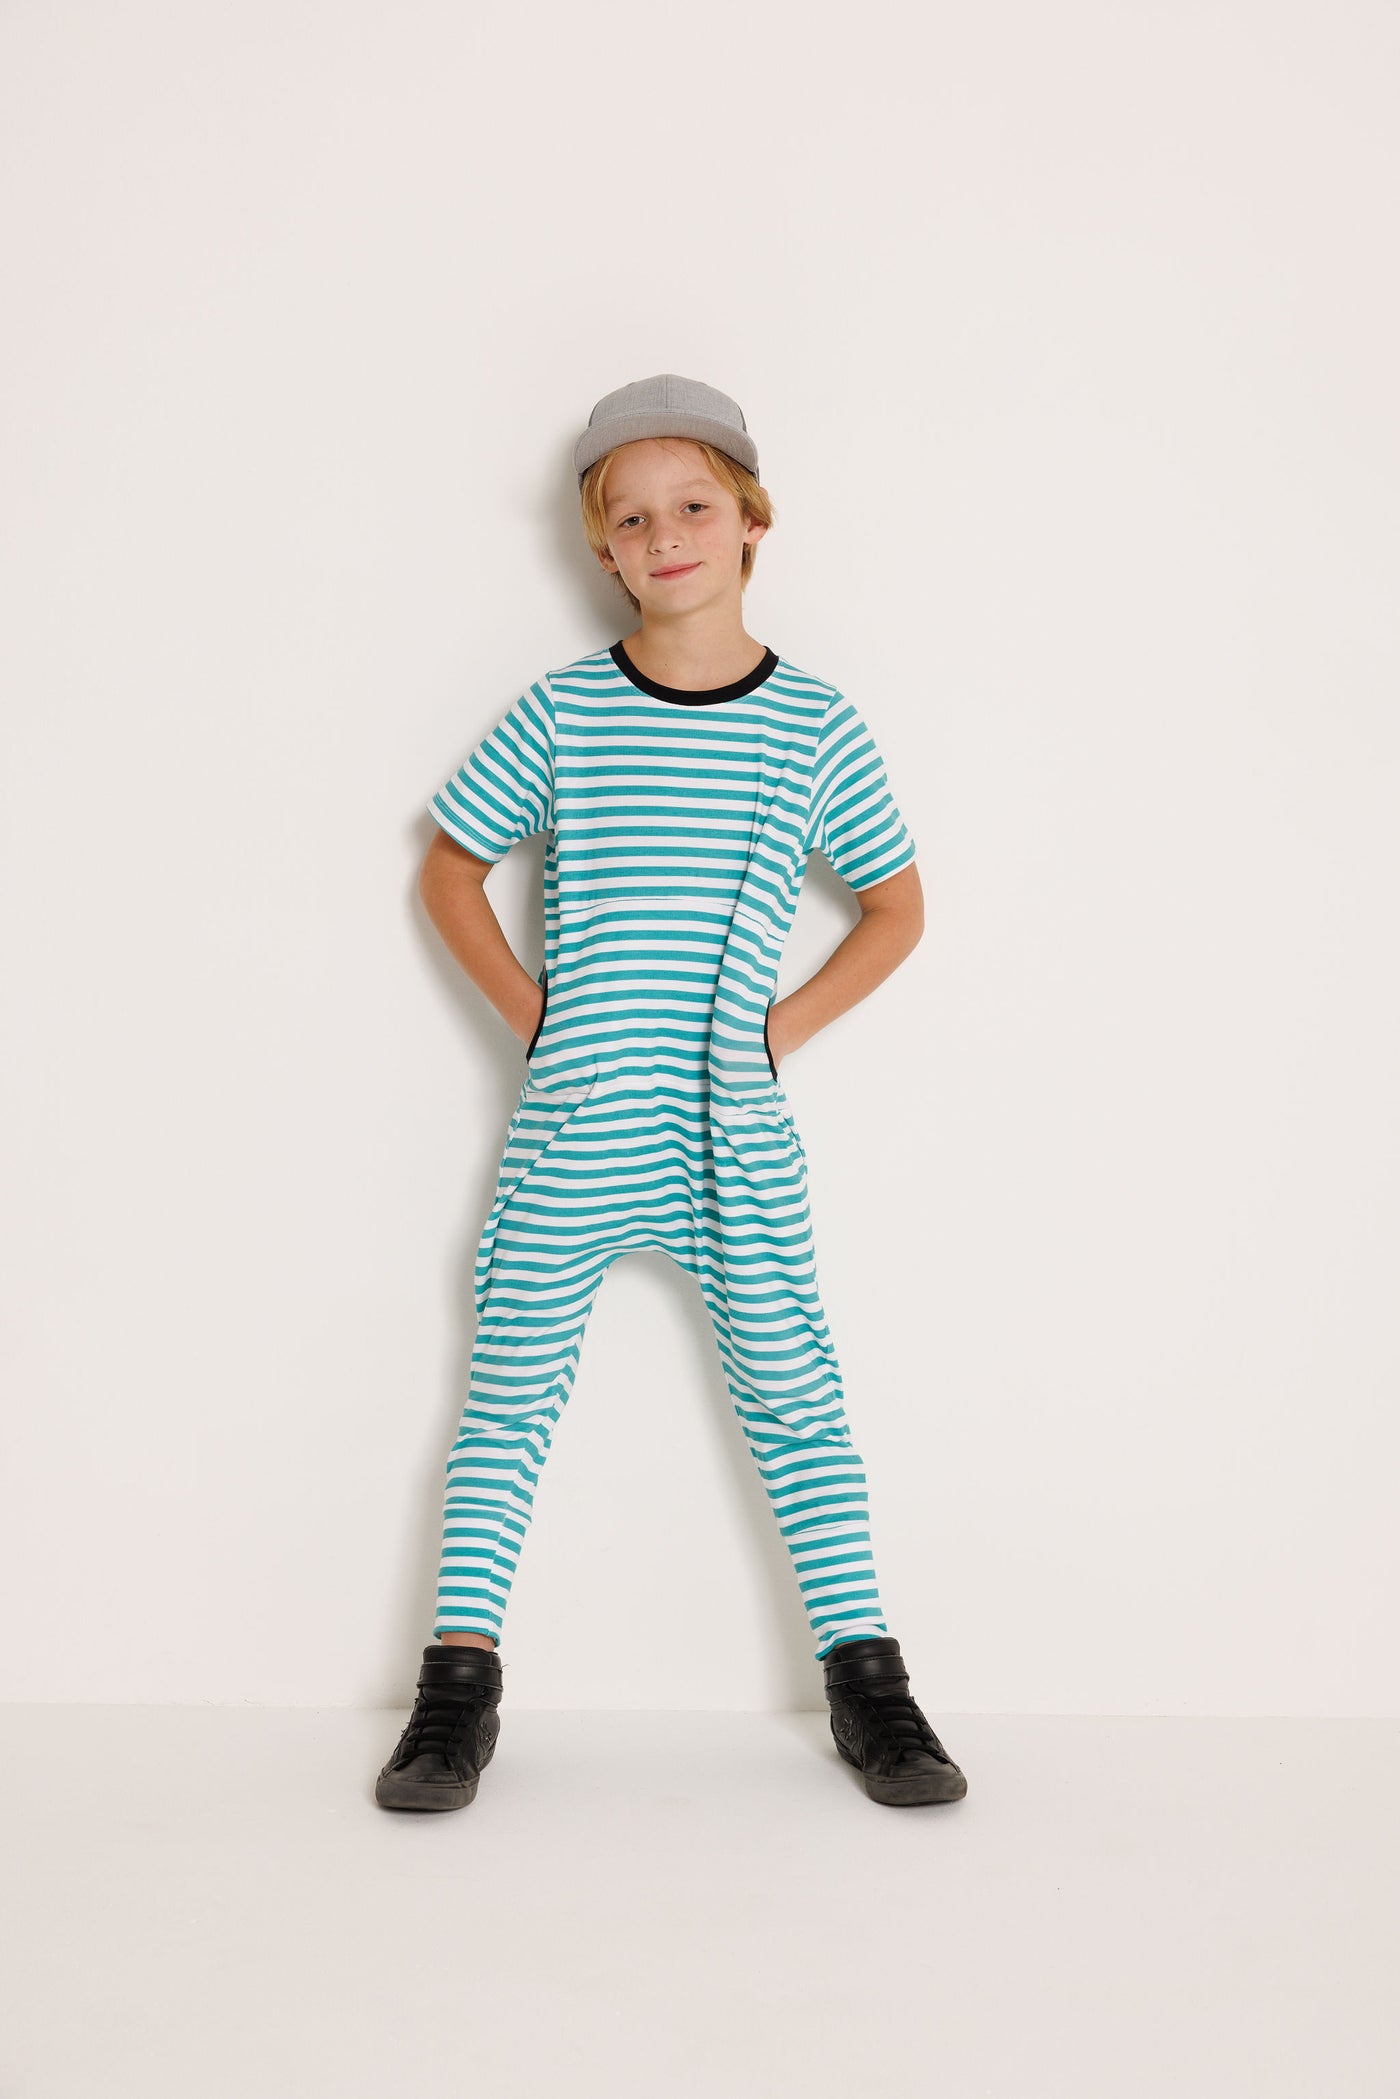 On our Radar: Cat & Jack Adaptive Clothing for Kids with Sensory Issues and  Disabilities